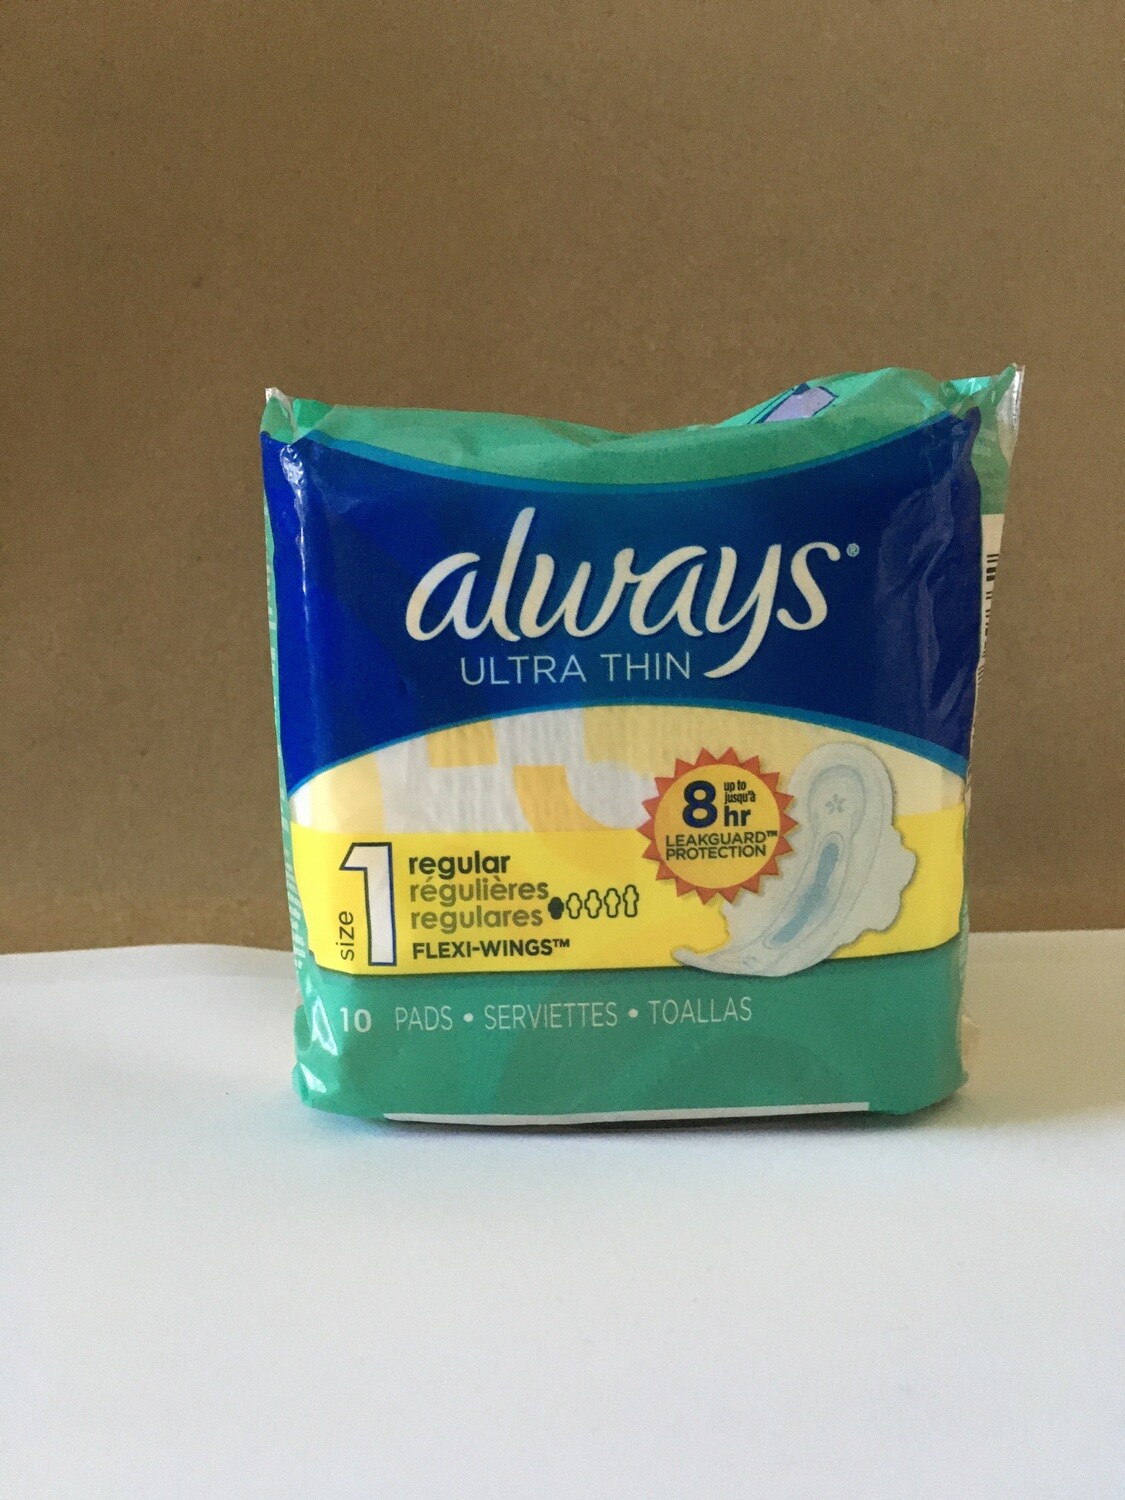 Health and Beauty / Feminine Products / Always Ultra Thin 10 ct